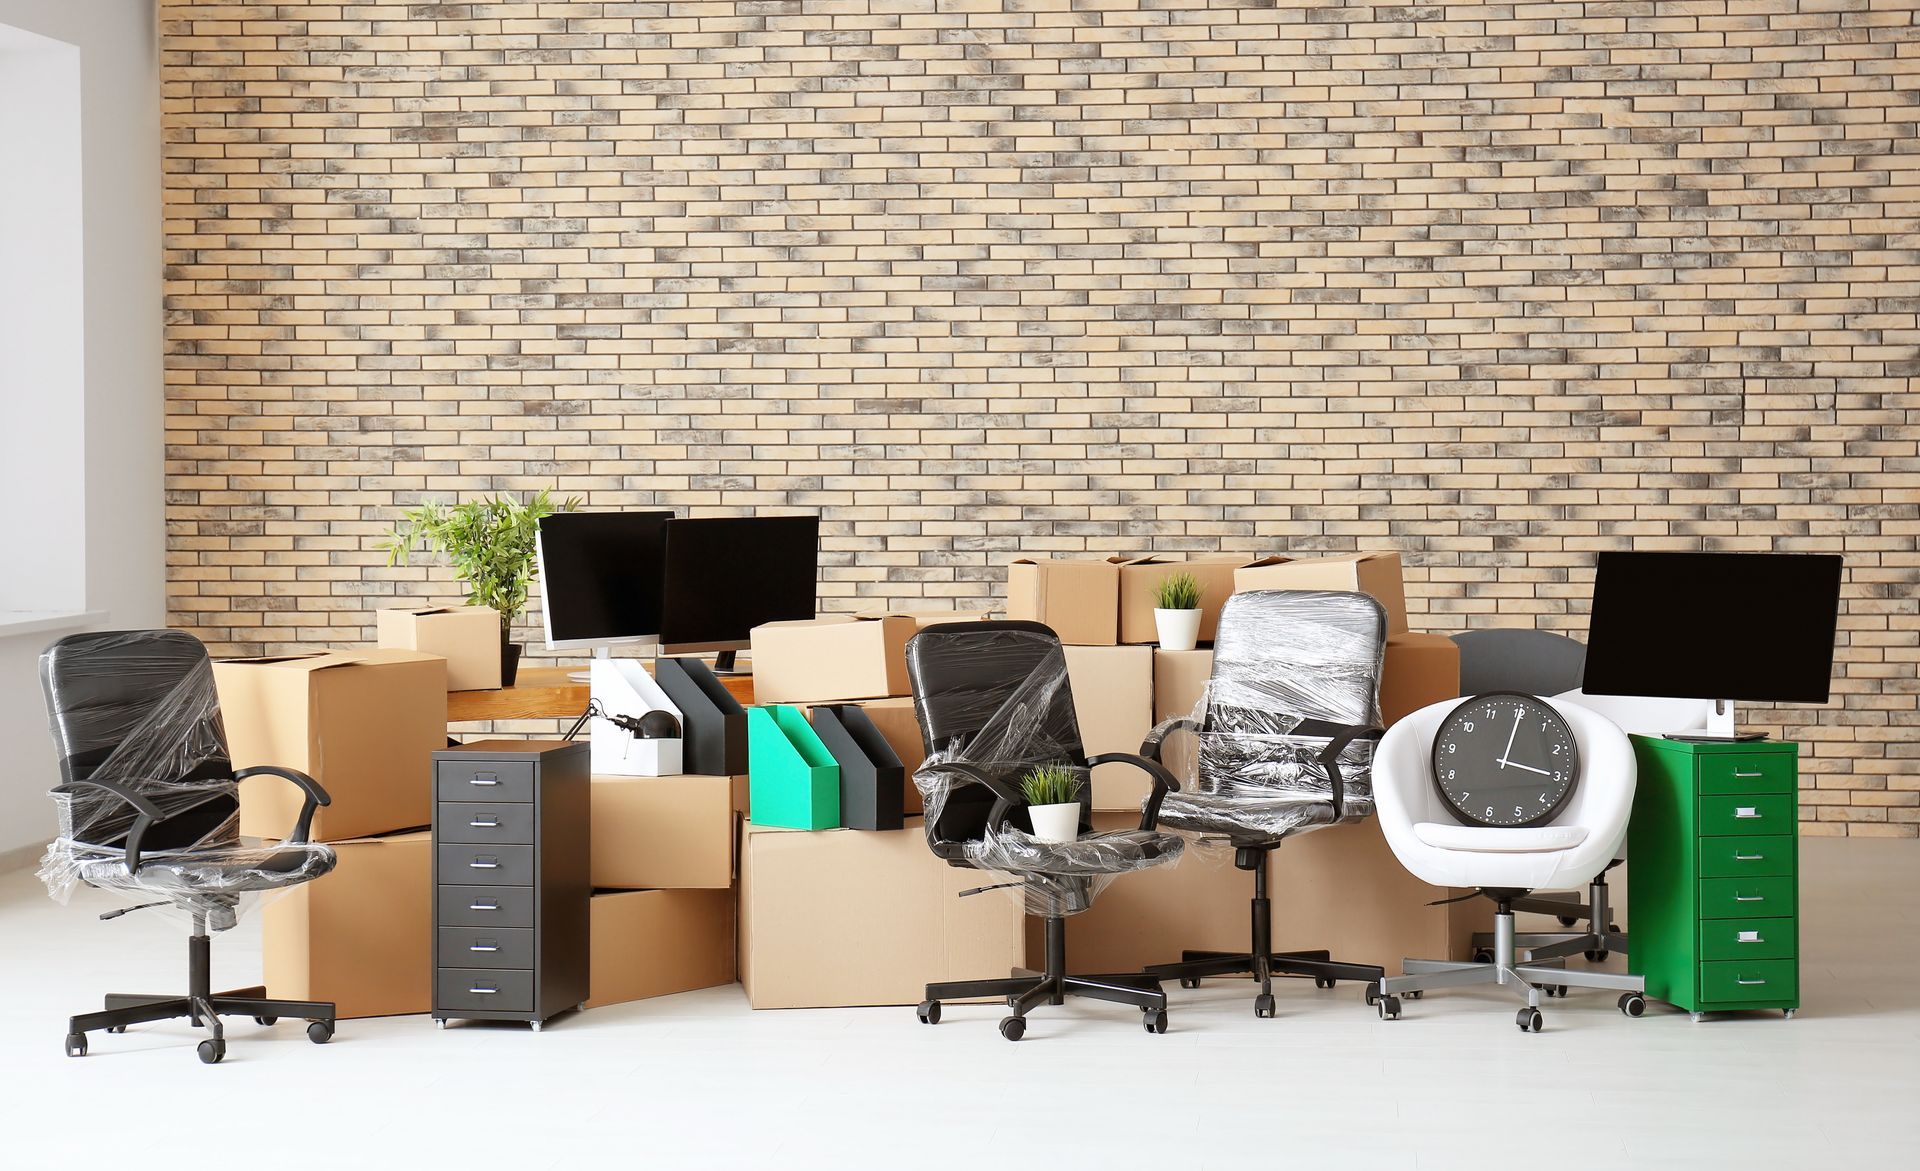 a row of office chairs and boxes in an office with a brick wall .